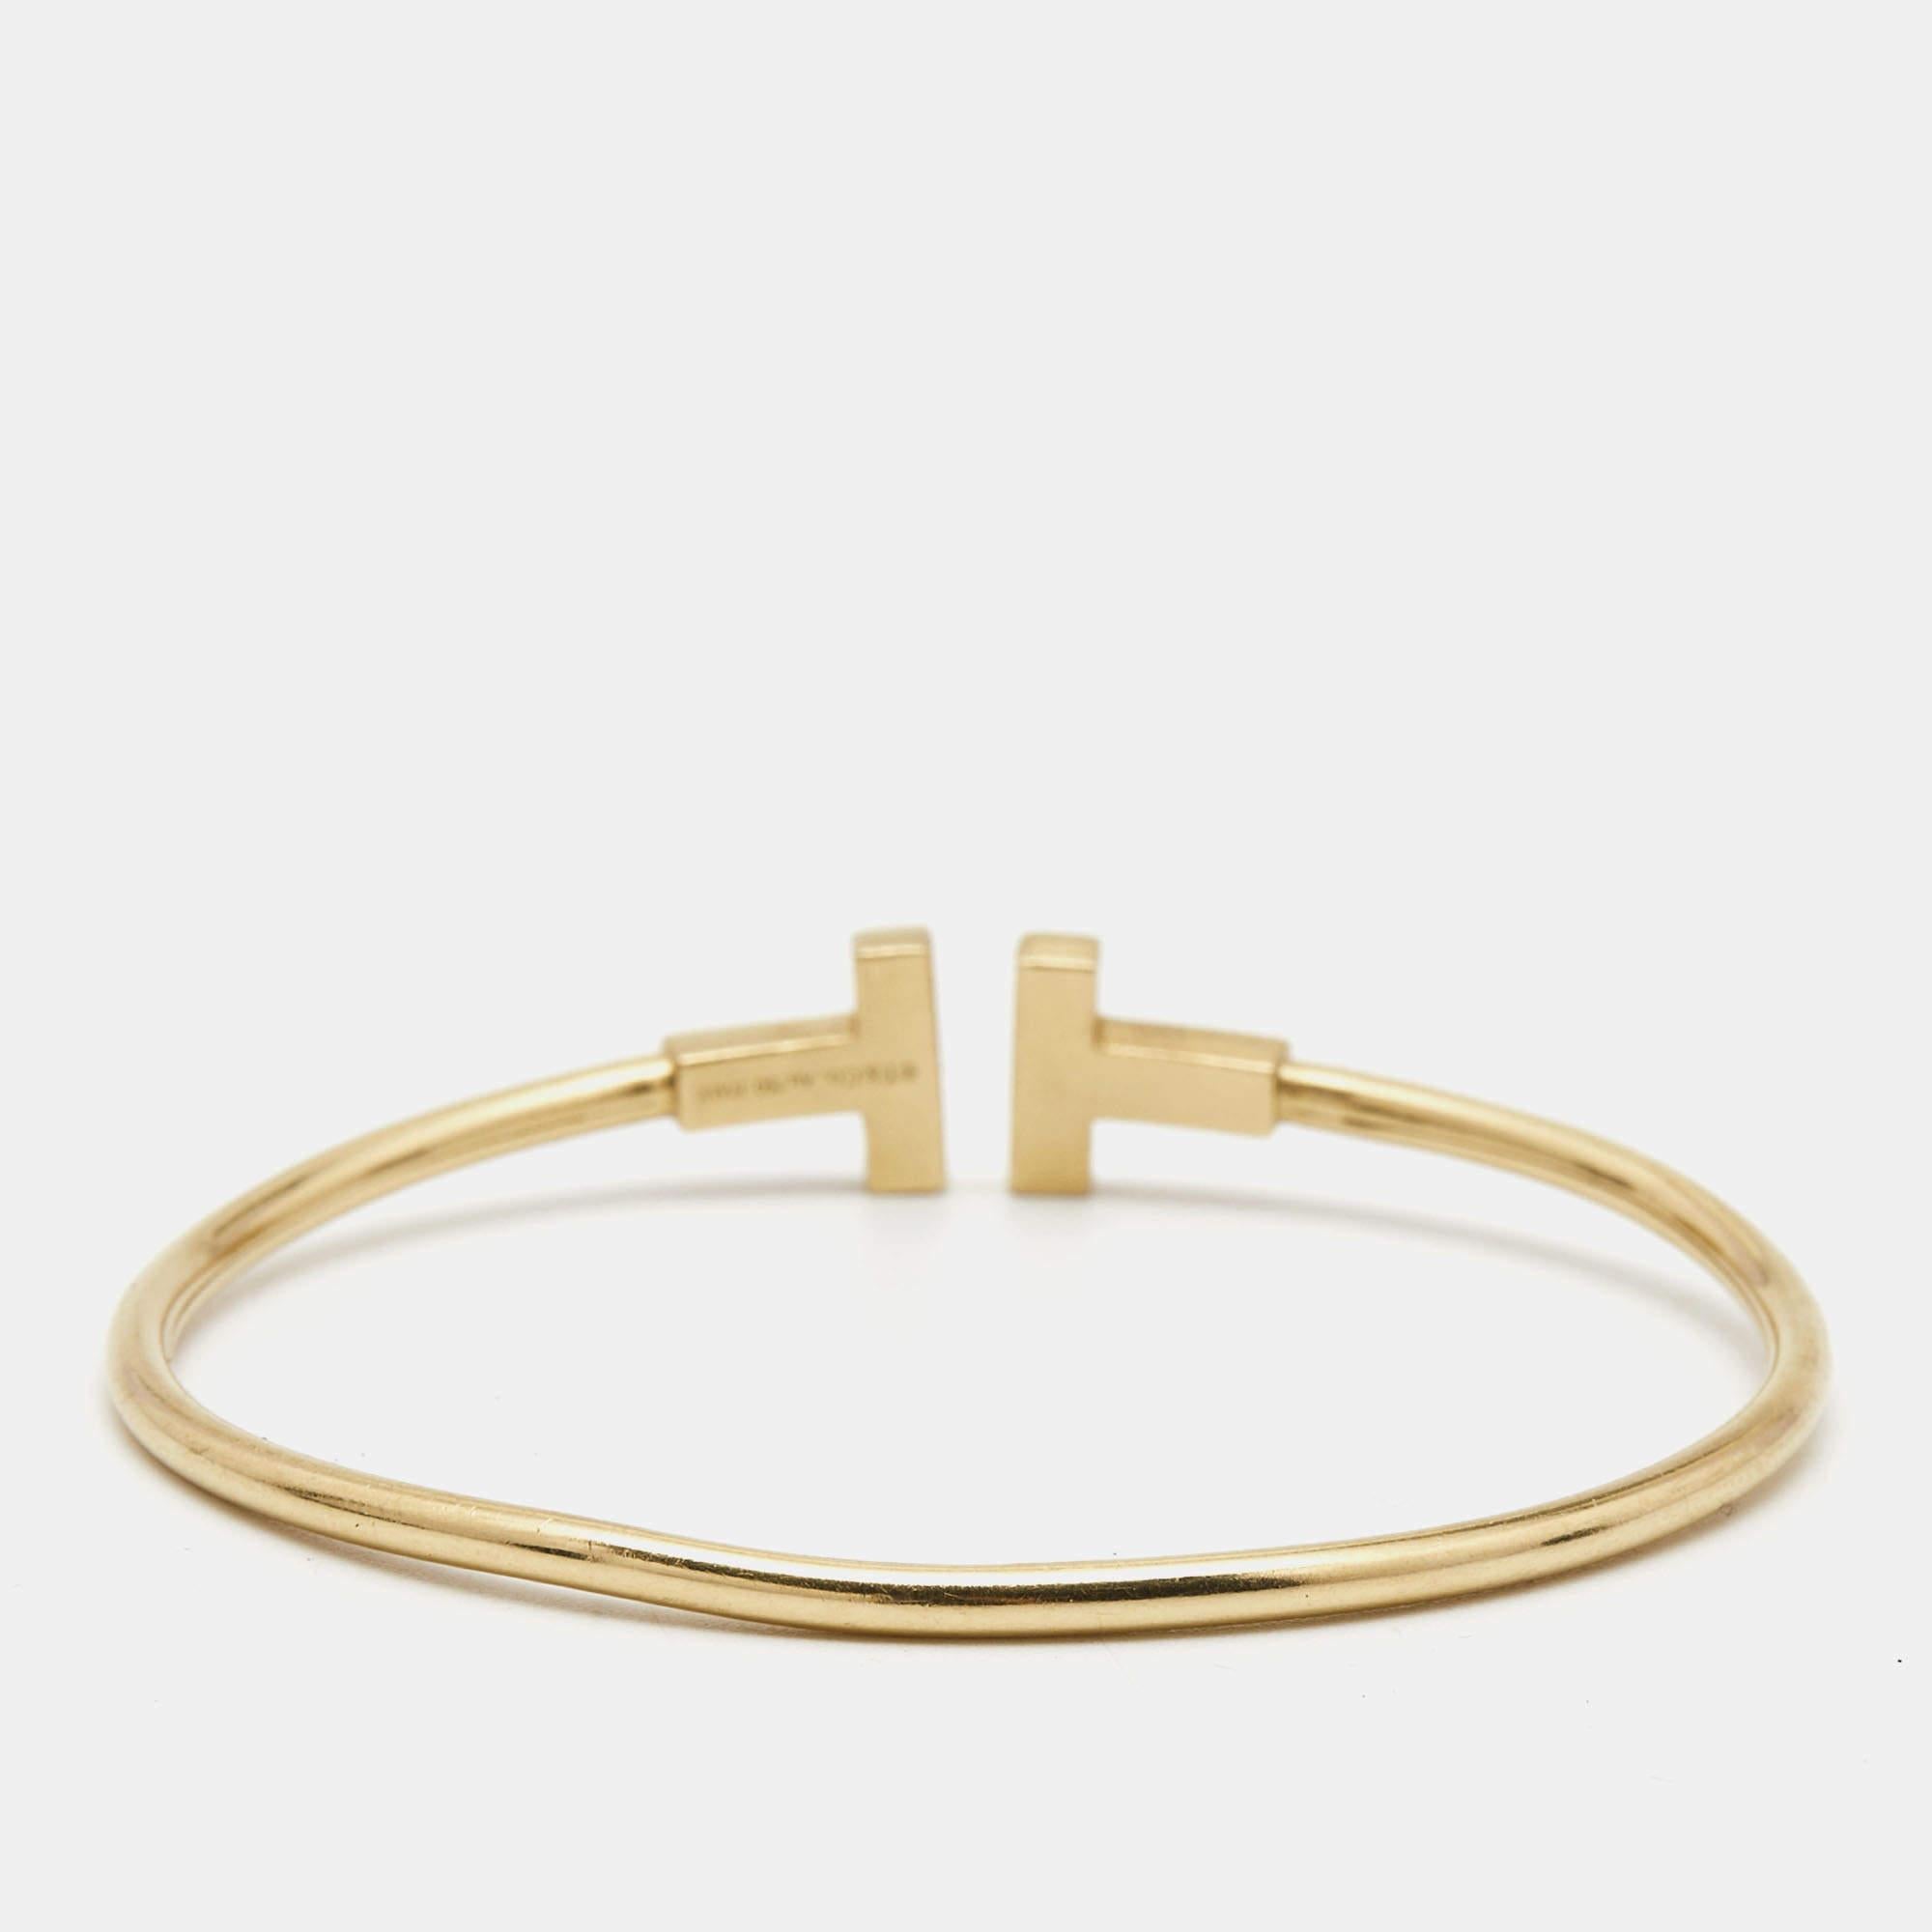 This wire bracelet from Tiffany is made from 18k yellow gold. The narrow wire of the bracelet curves beautifully around your wrist. Finished with the signature ‘T’ for Tiffany’s, this is an easy slip-on accessory.

Includes: Original Case

